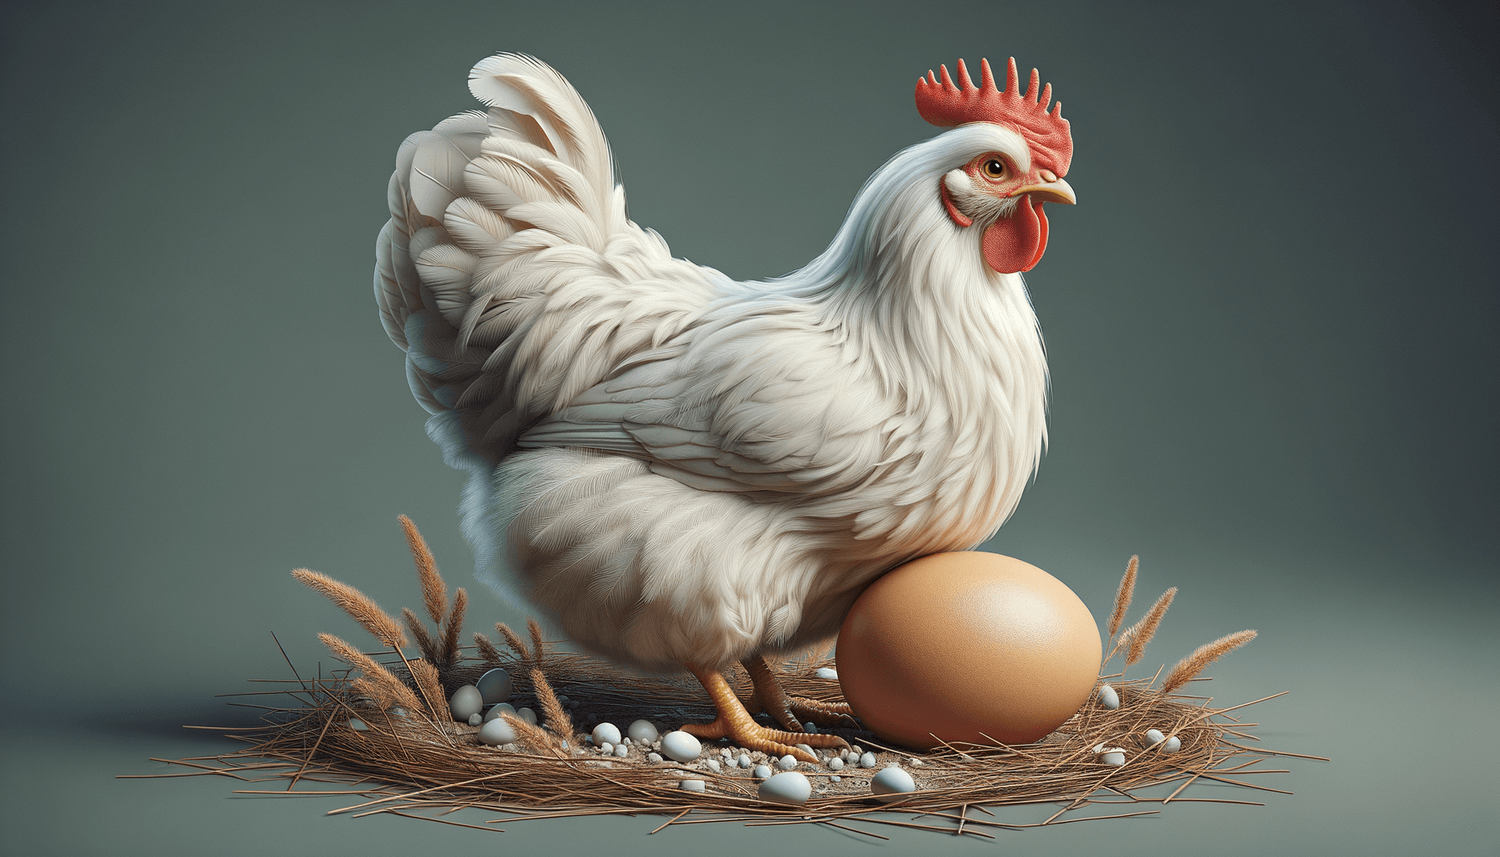 White Holland Chicken Breed. What is it?